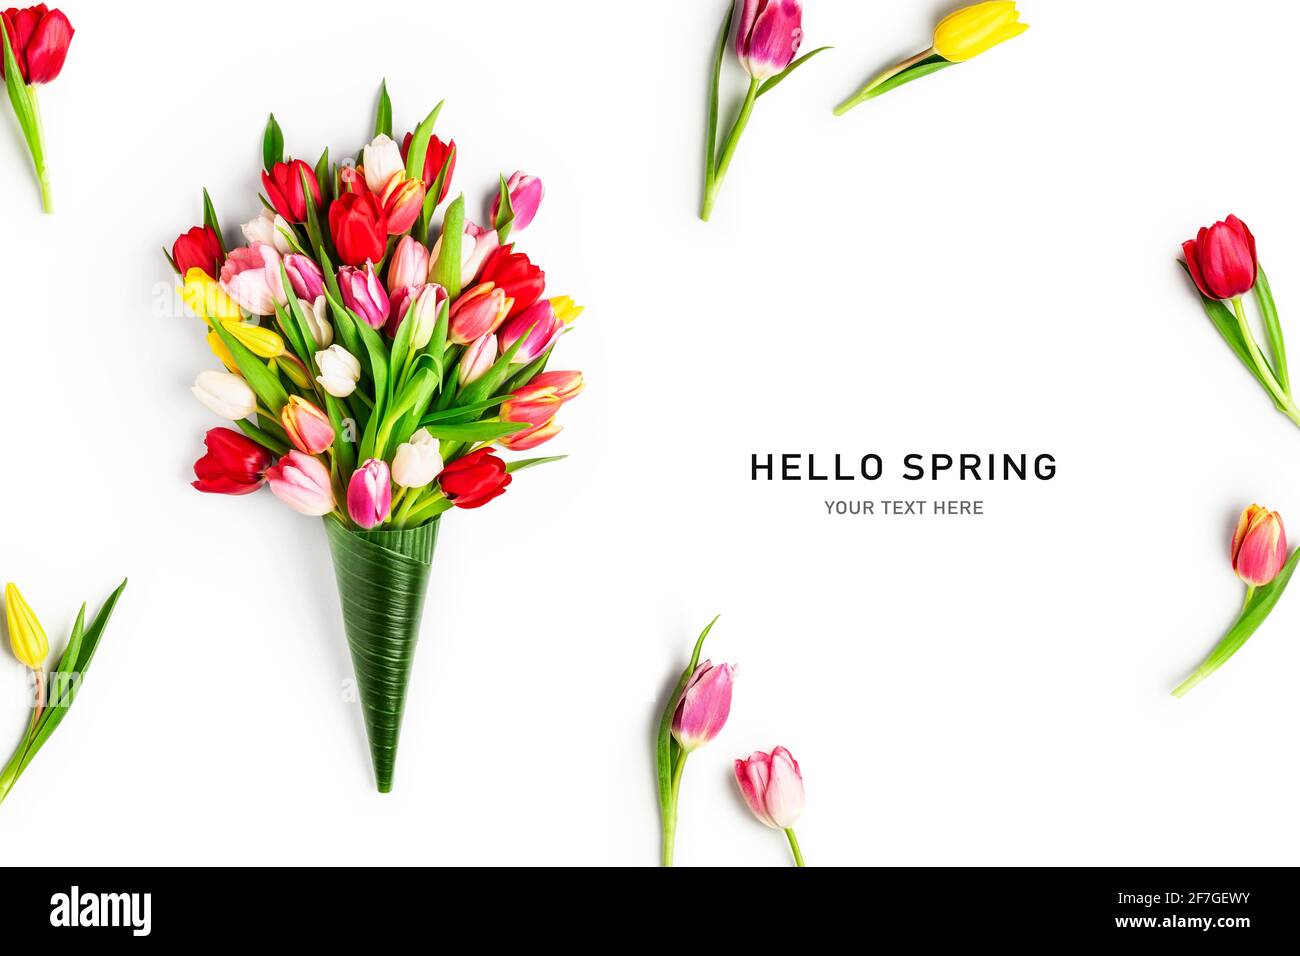 Creative layout with colorful tulip flowers isolated on white background. Floral composition with beautiful fresh tulips. Hello spring and easter conc Stock Photo